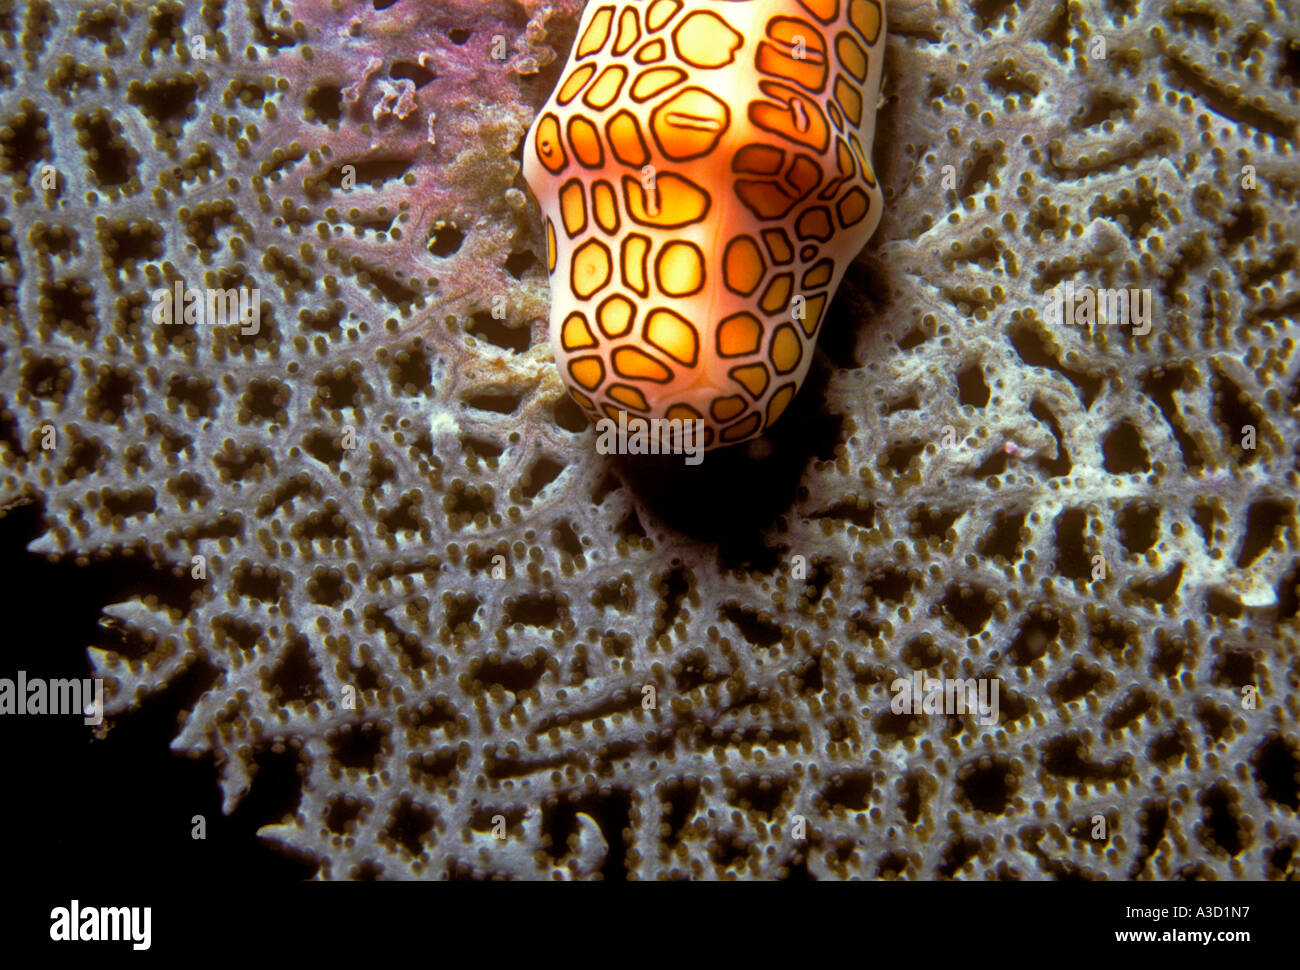 flamingo tongue snail, flamingo tongue snails, Cyphoma gibbosum, sea snail, sea snail, Pigeon Island, Guadeloupe, French West Indies Stock Photo